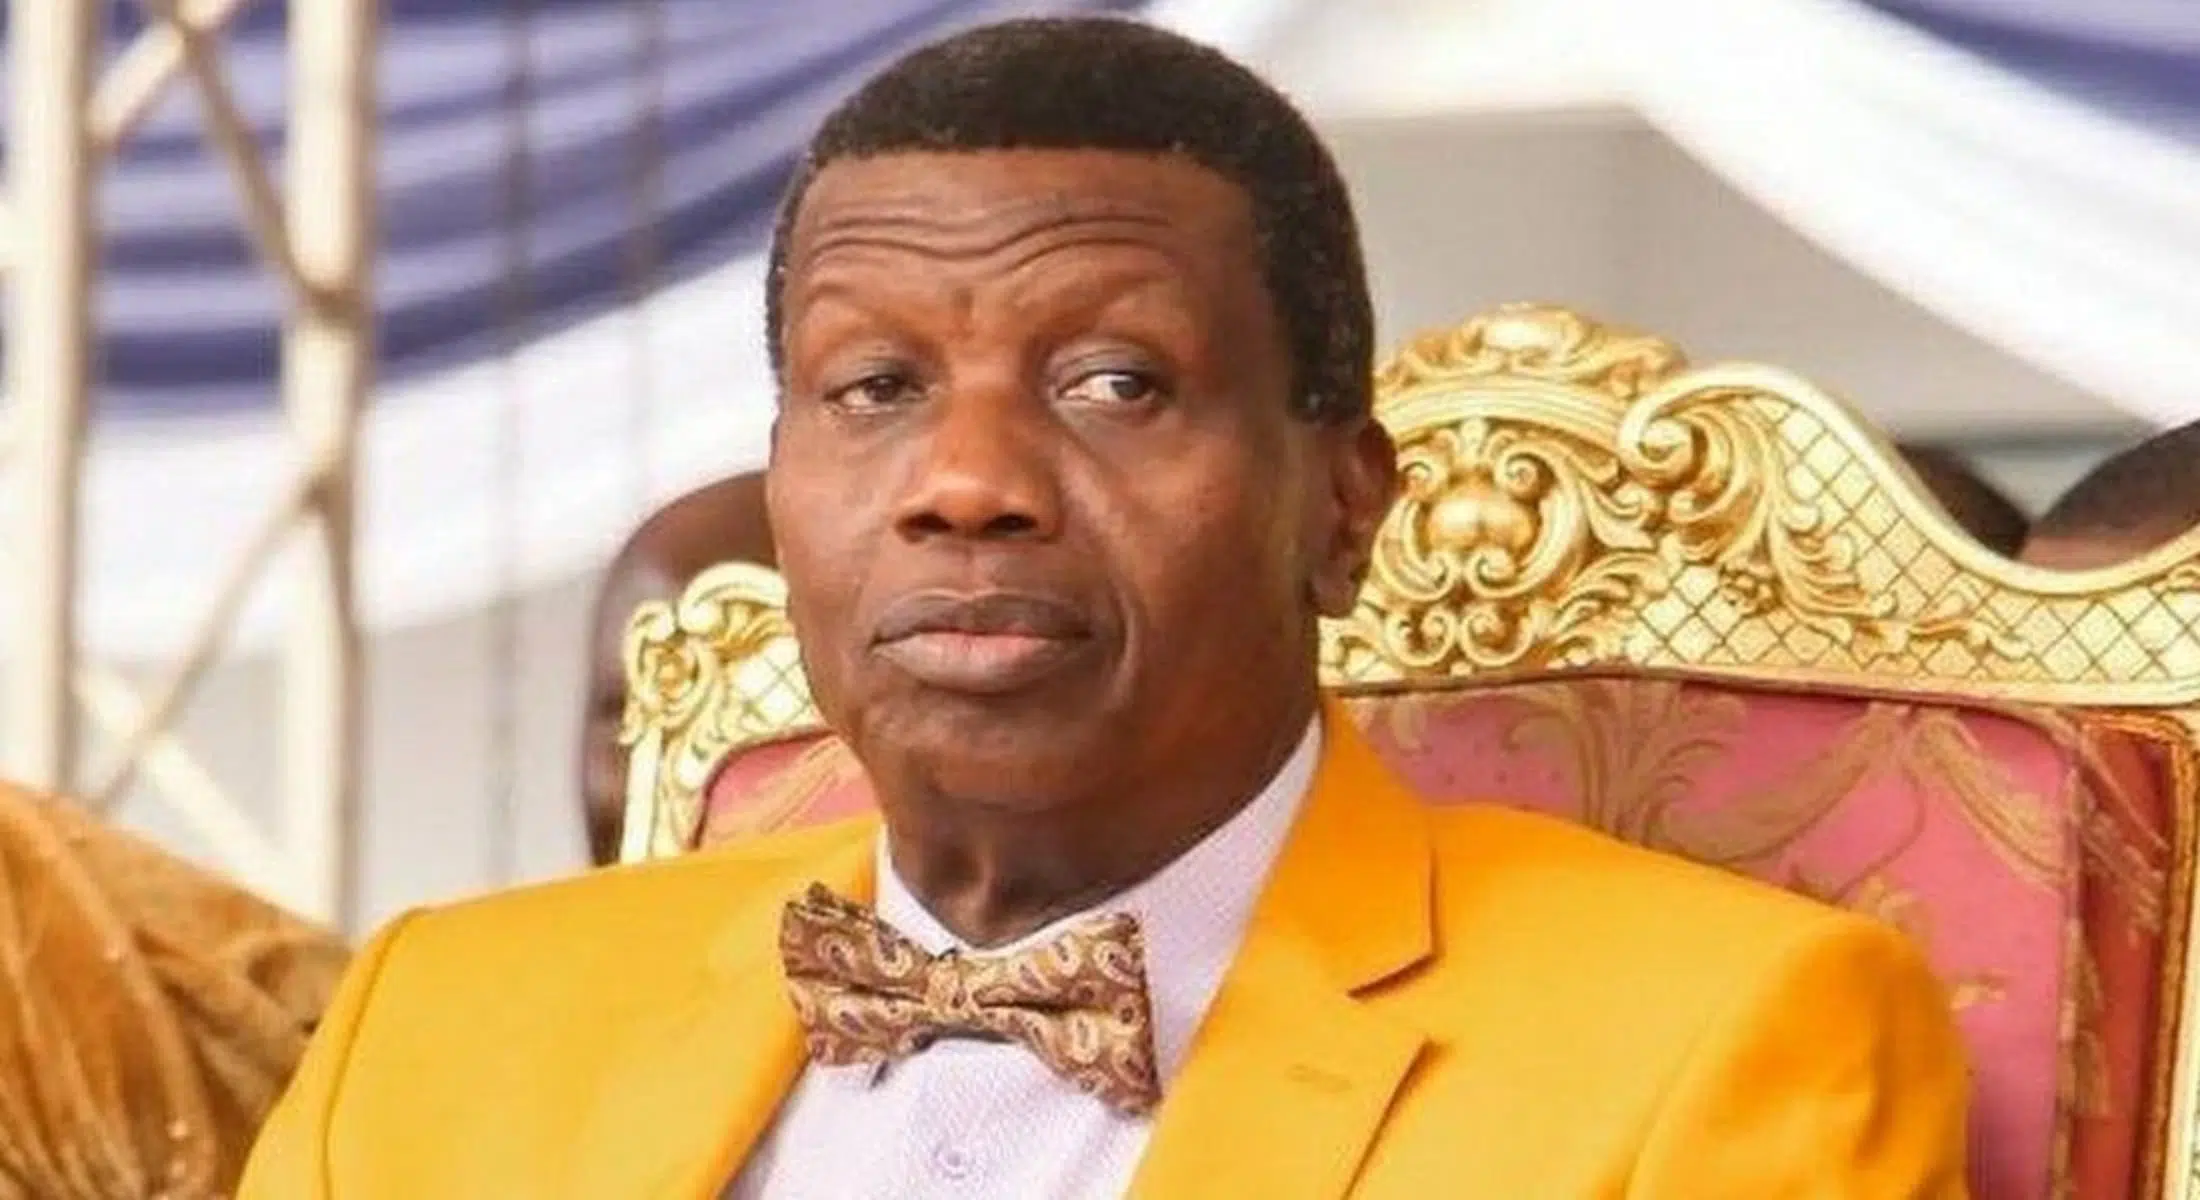 "I Will Take COVID-19 Vaccine On One Condition" - Pastor E.A Adeboye